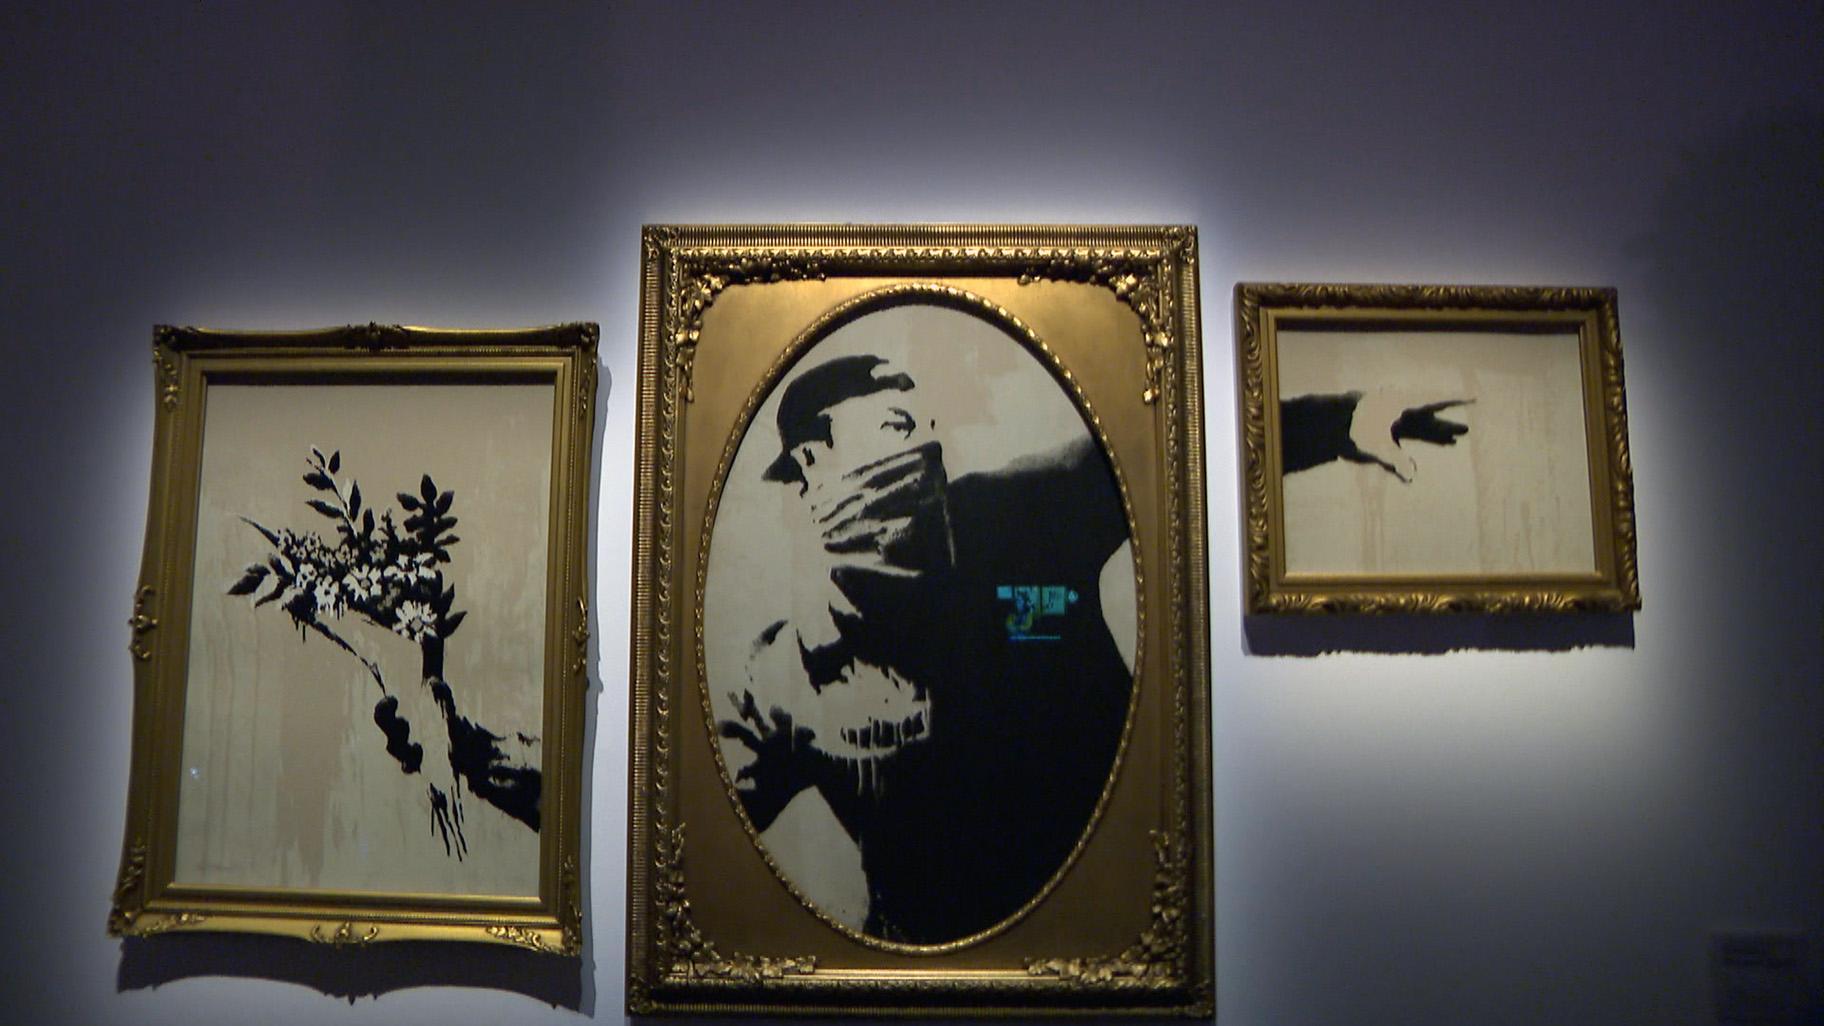 “Flower Thrower” is one of many recognizable work featured in “The Art of Banksy.” (WTTW News)